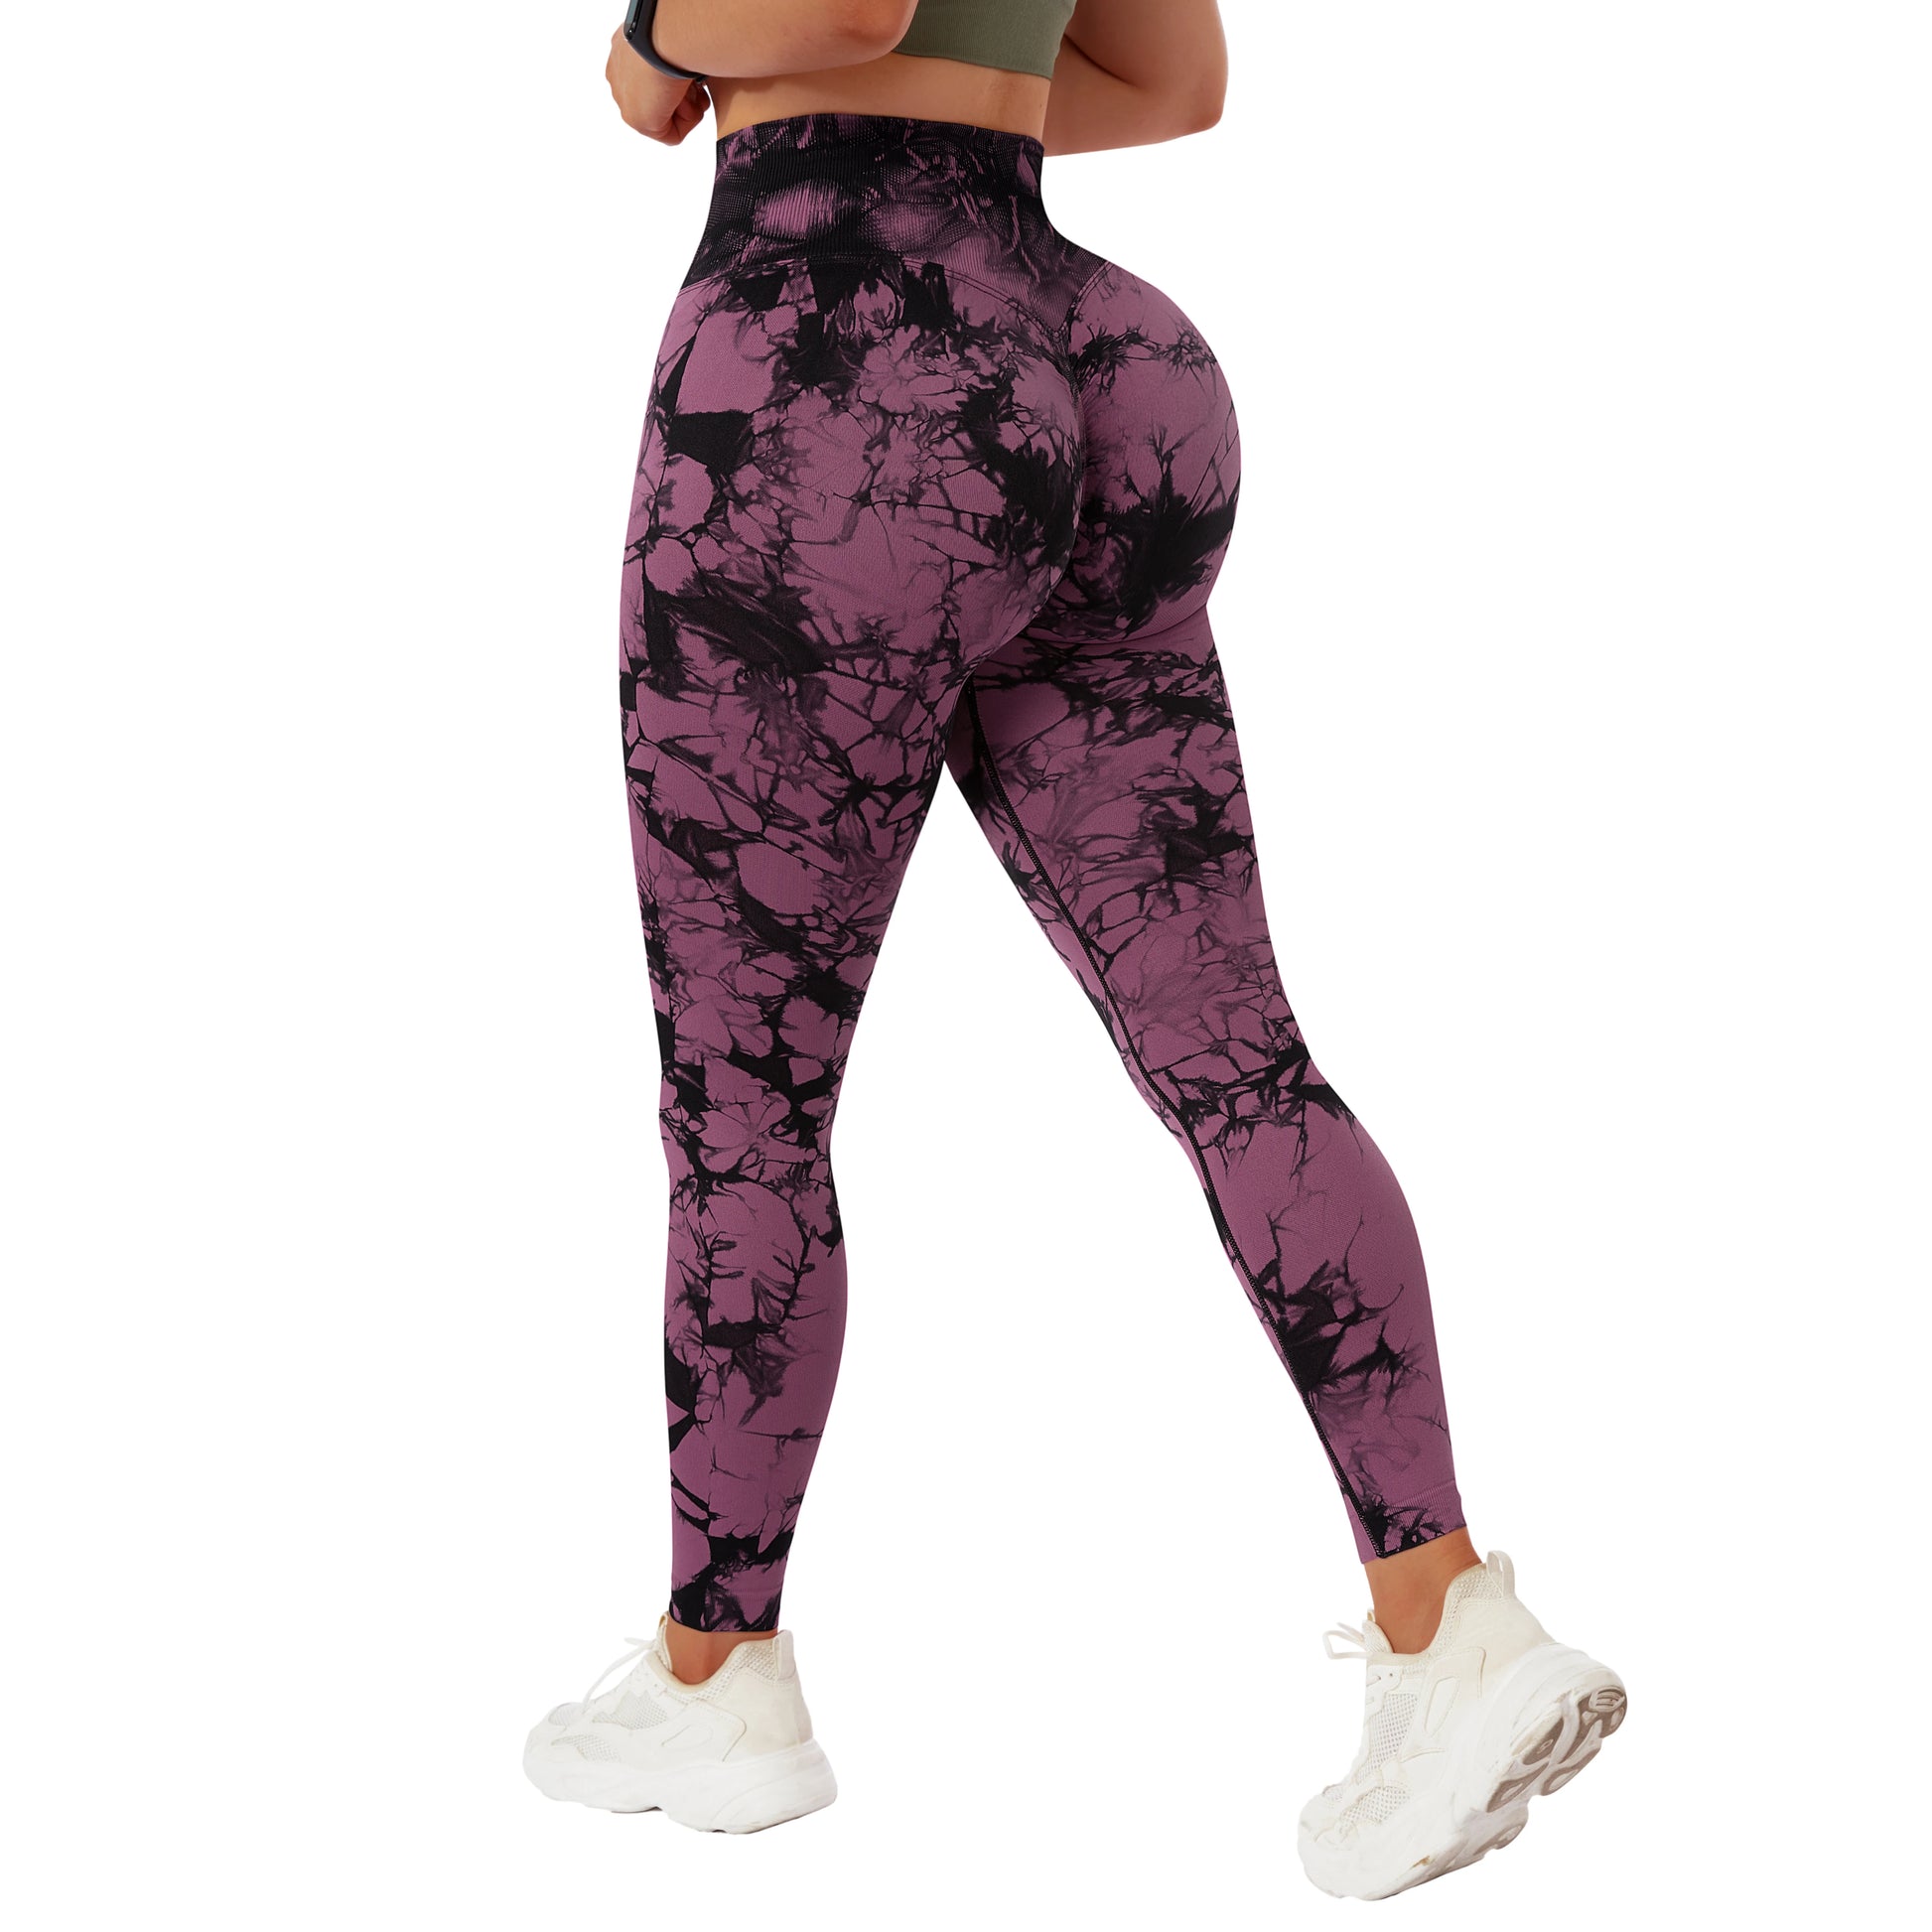 What is New Arrival Tie Dye Gradient Patterned Seamless Gym Leggings for  Women, High Waist Workout Tights Butt Lift Tummy Control Ruched Booty Yoga  Pants